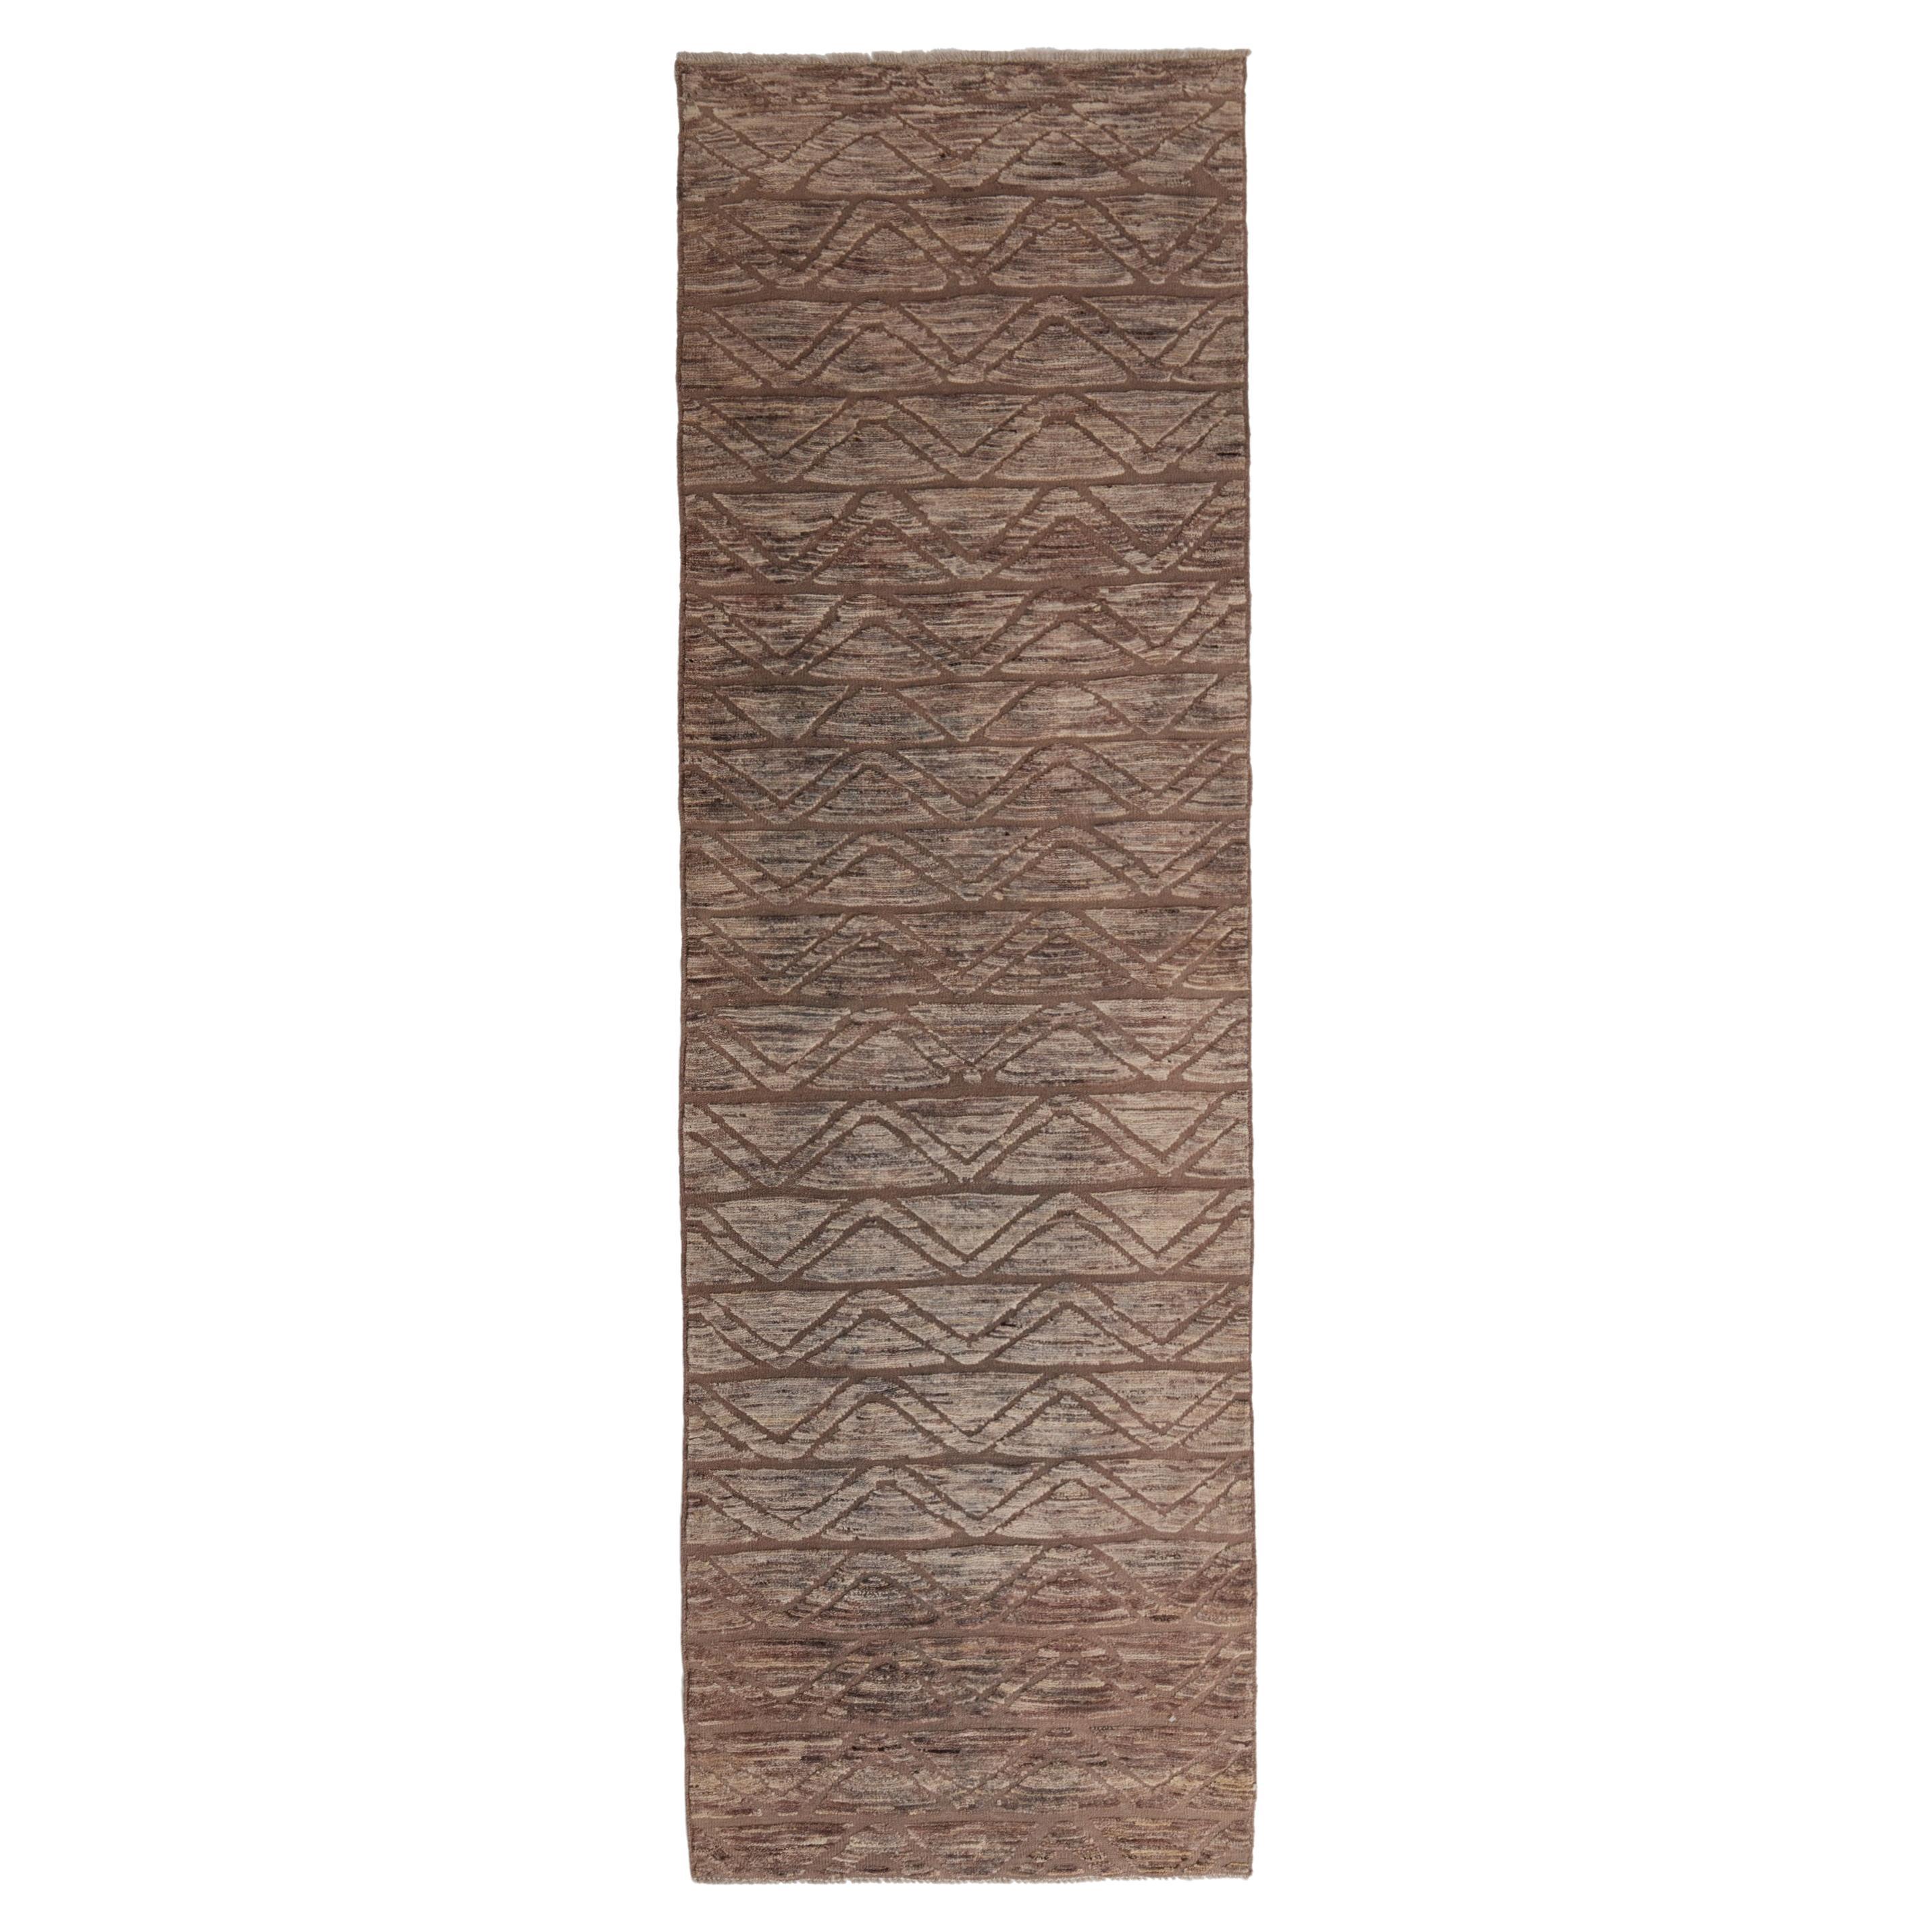 abc carpet Brown Zameen Transitional Wool Runner - 3' x 9'10" For Sale